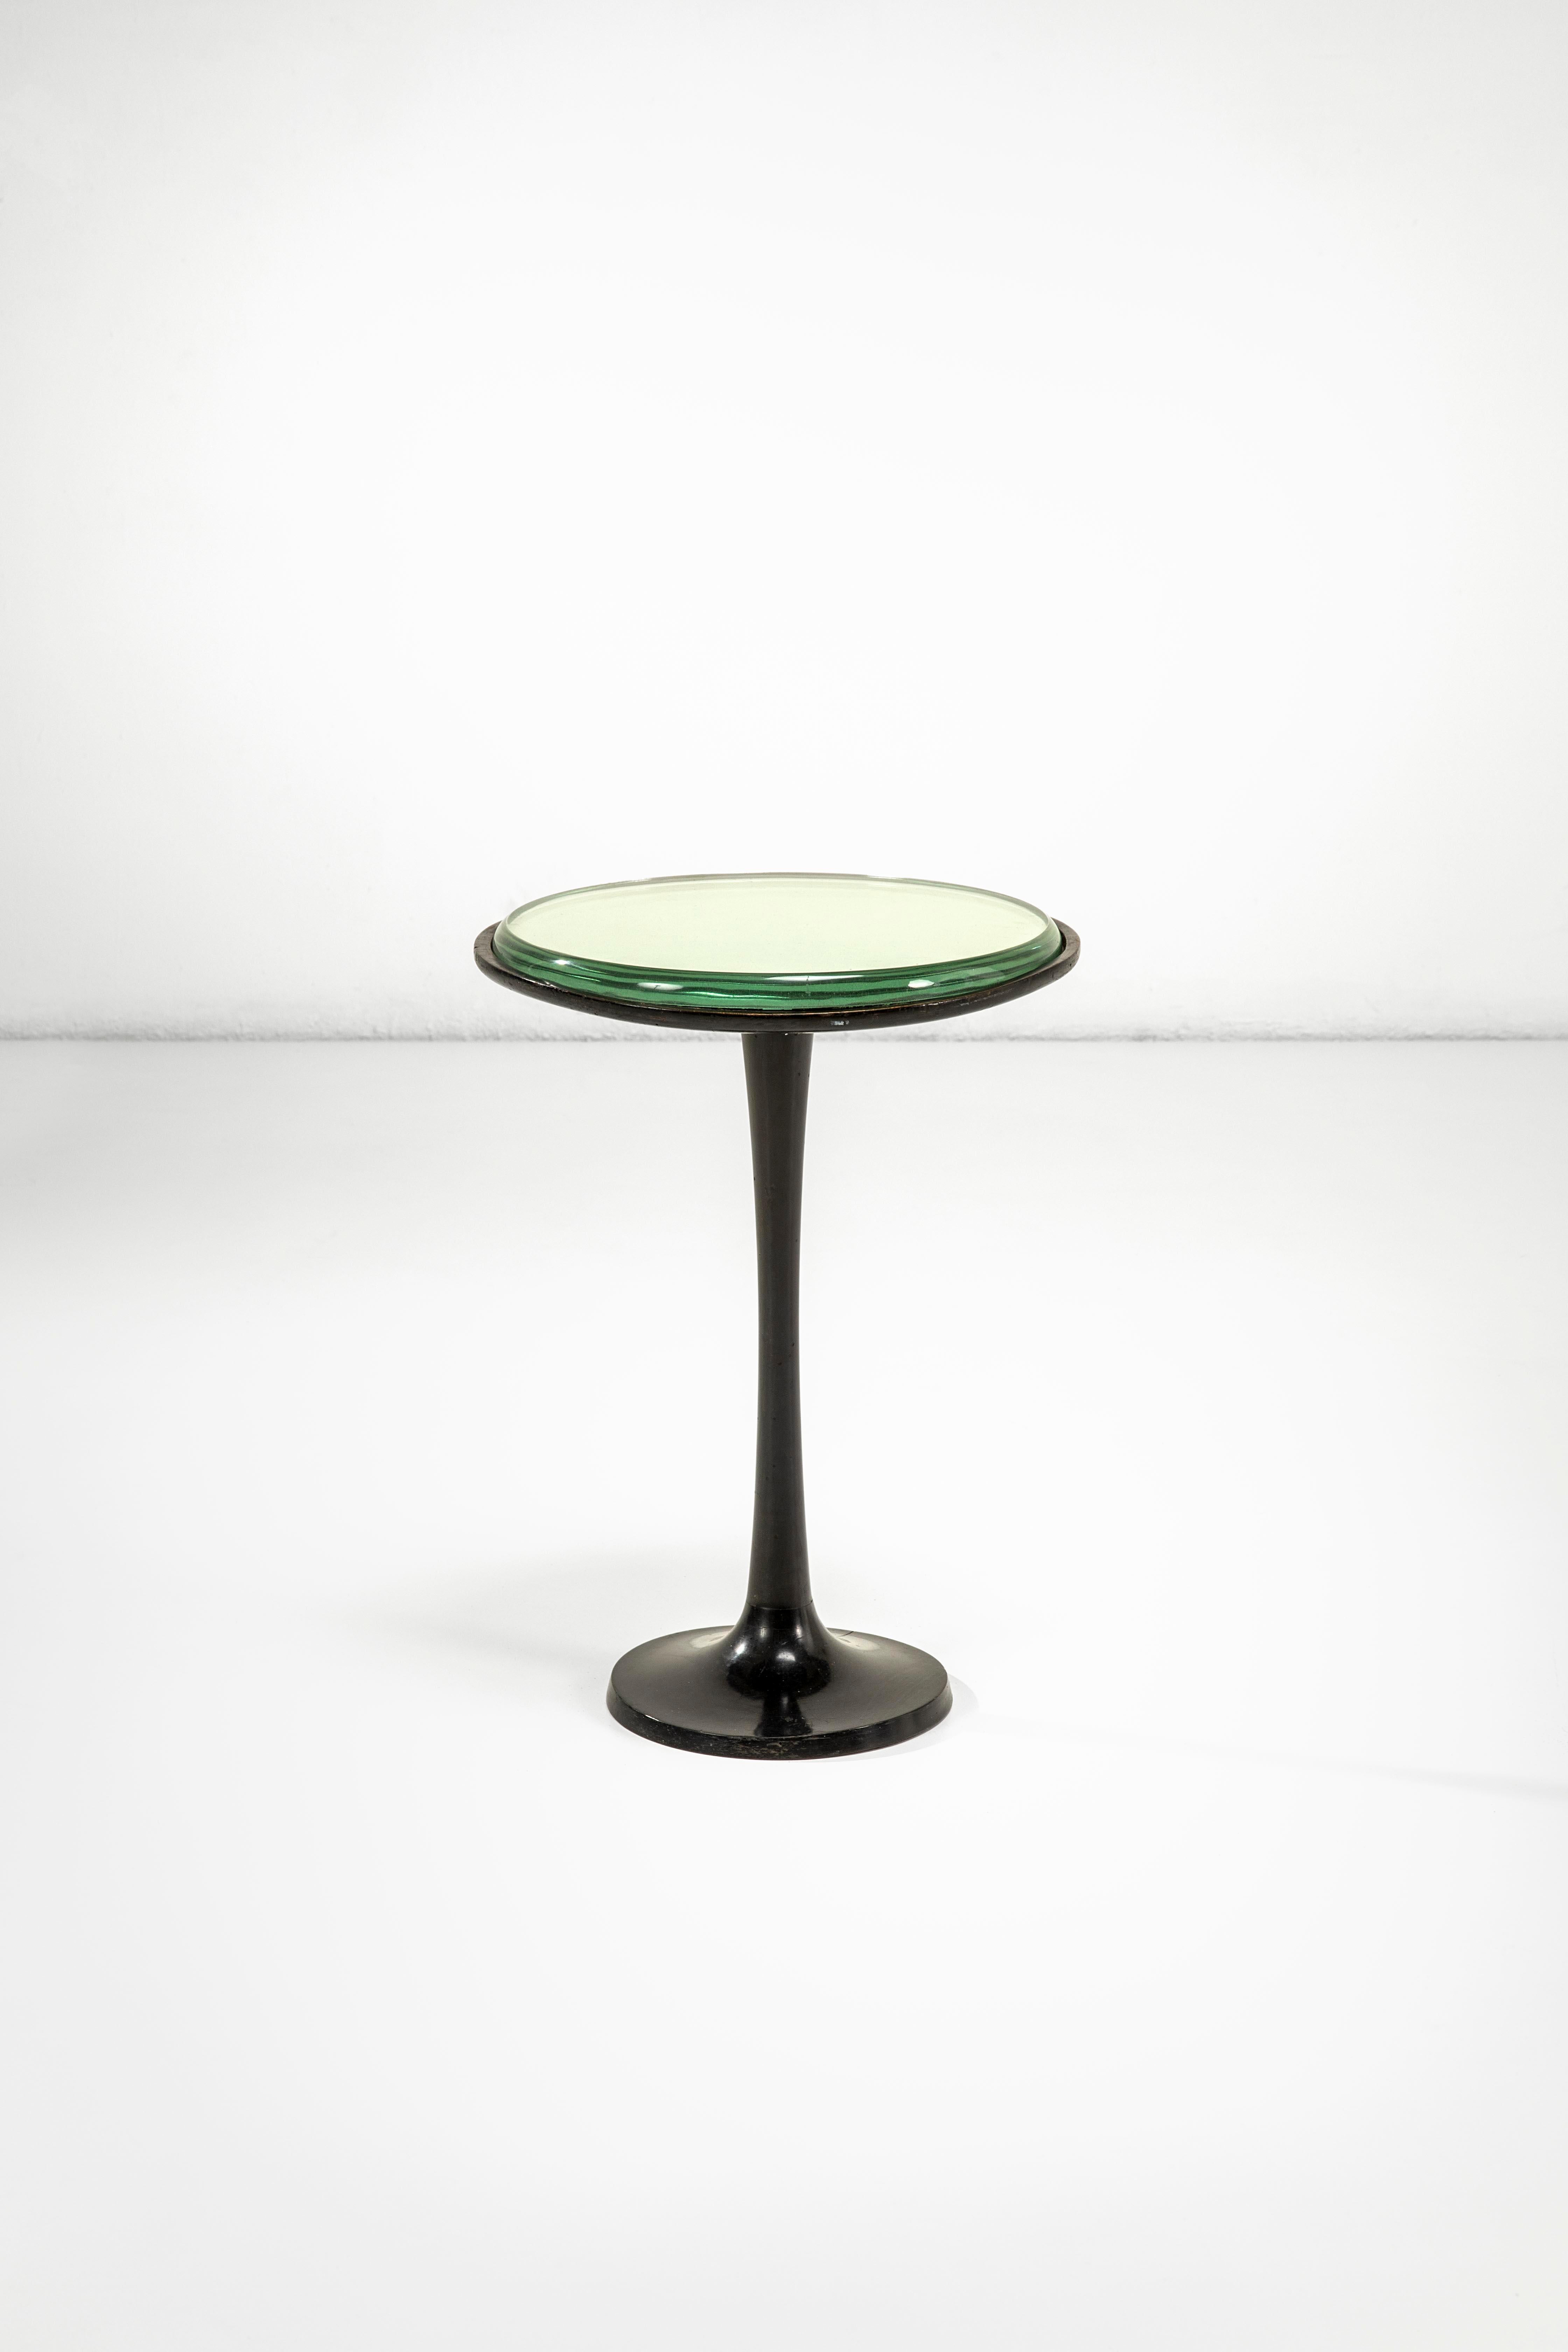 This elegant occasional table with an ebonized wood structure and a beveled mirrored crystal top is delicate, discreet, and with sinuous lines both in terms of the structure itself and the finishes such as the magnificent grinding of the crystal.